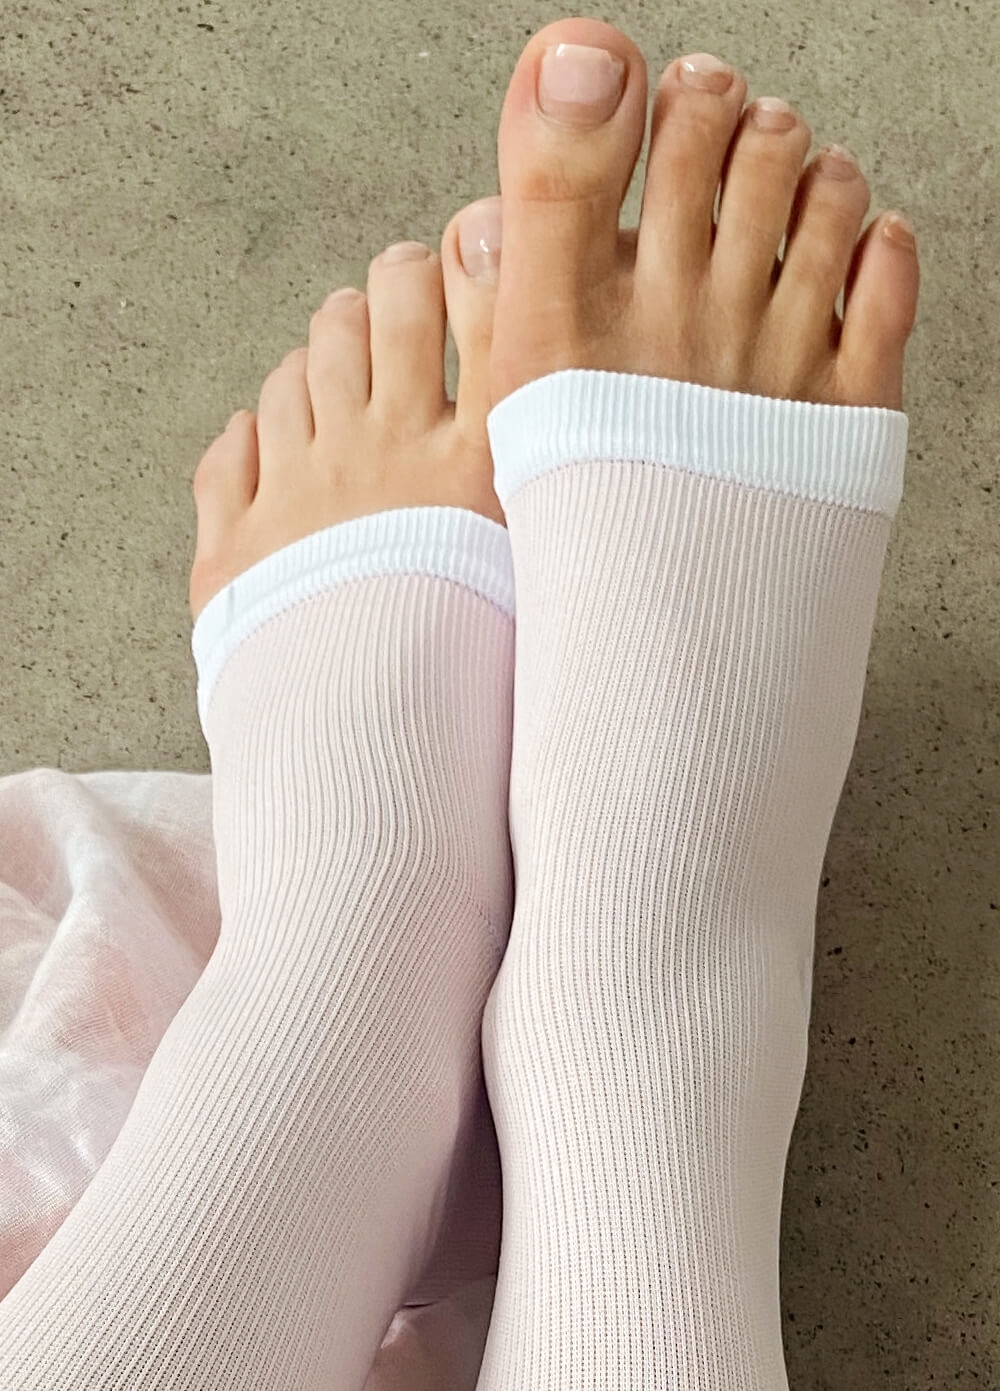 Mama Sox - Inspire Open Toe Maternity Compression Socks in Pale Pink